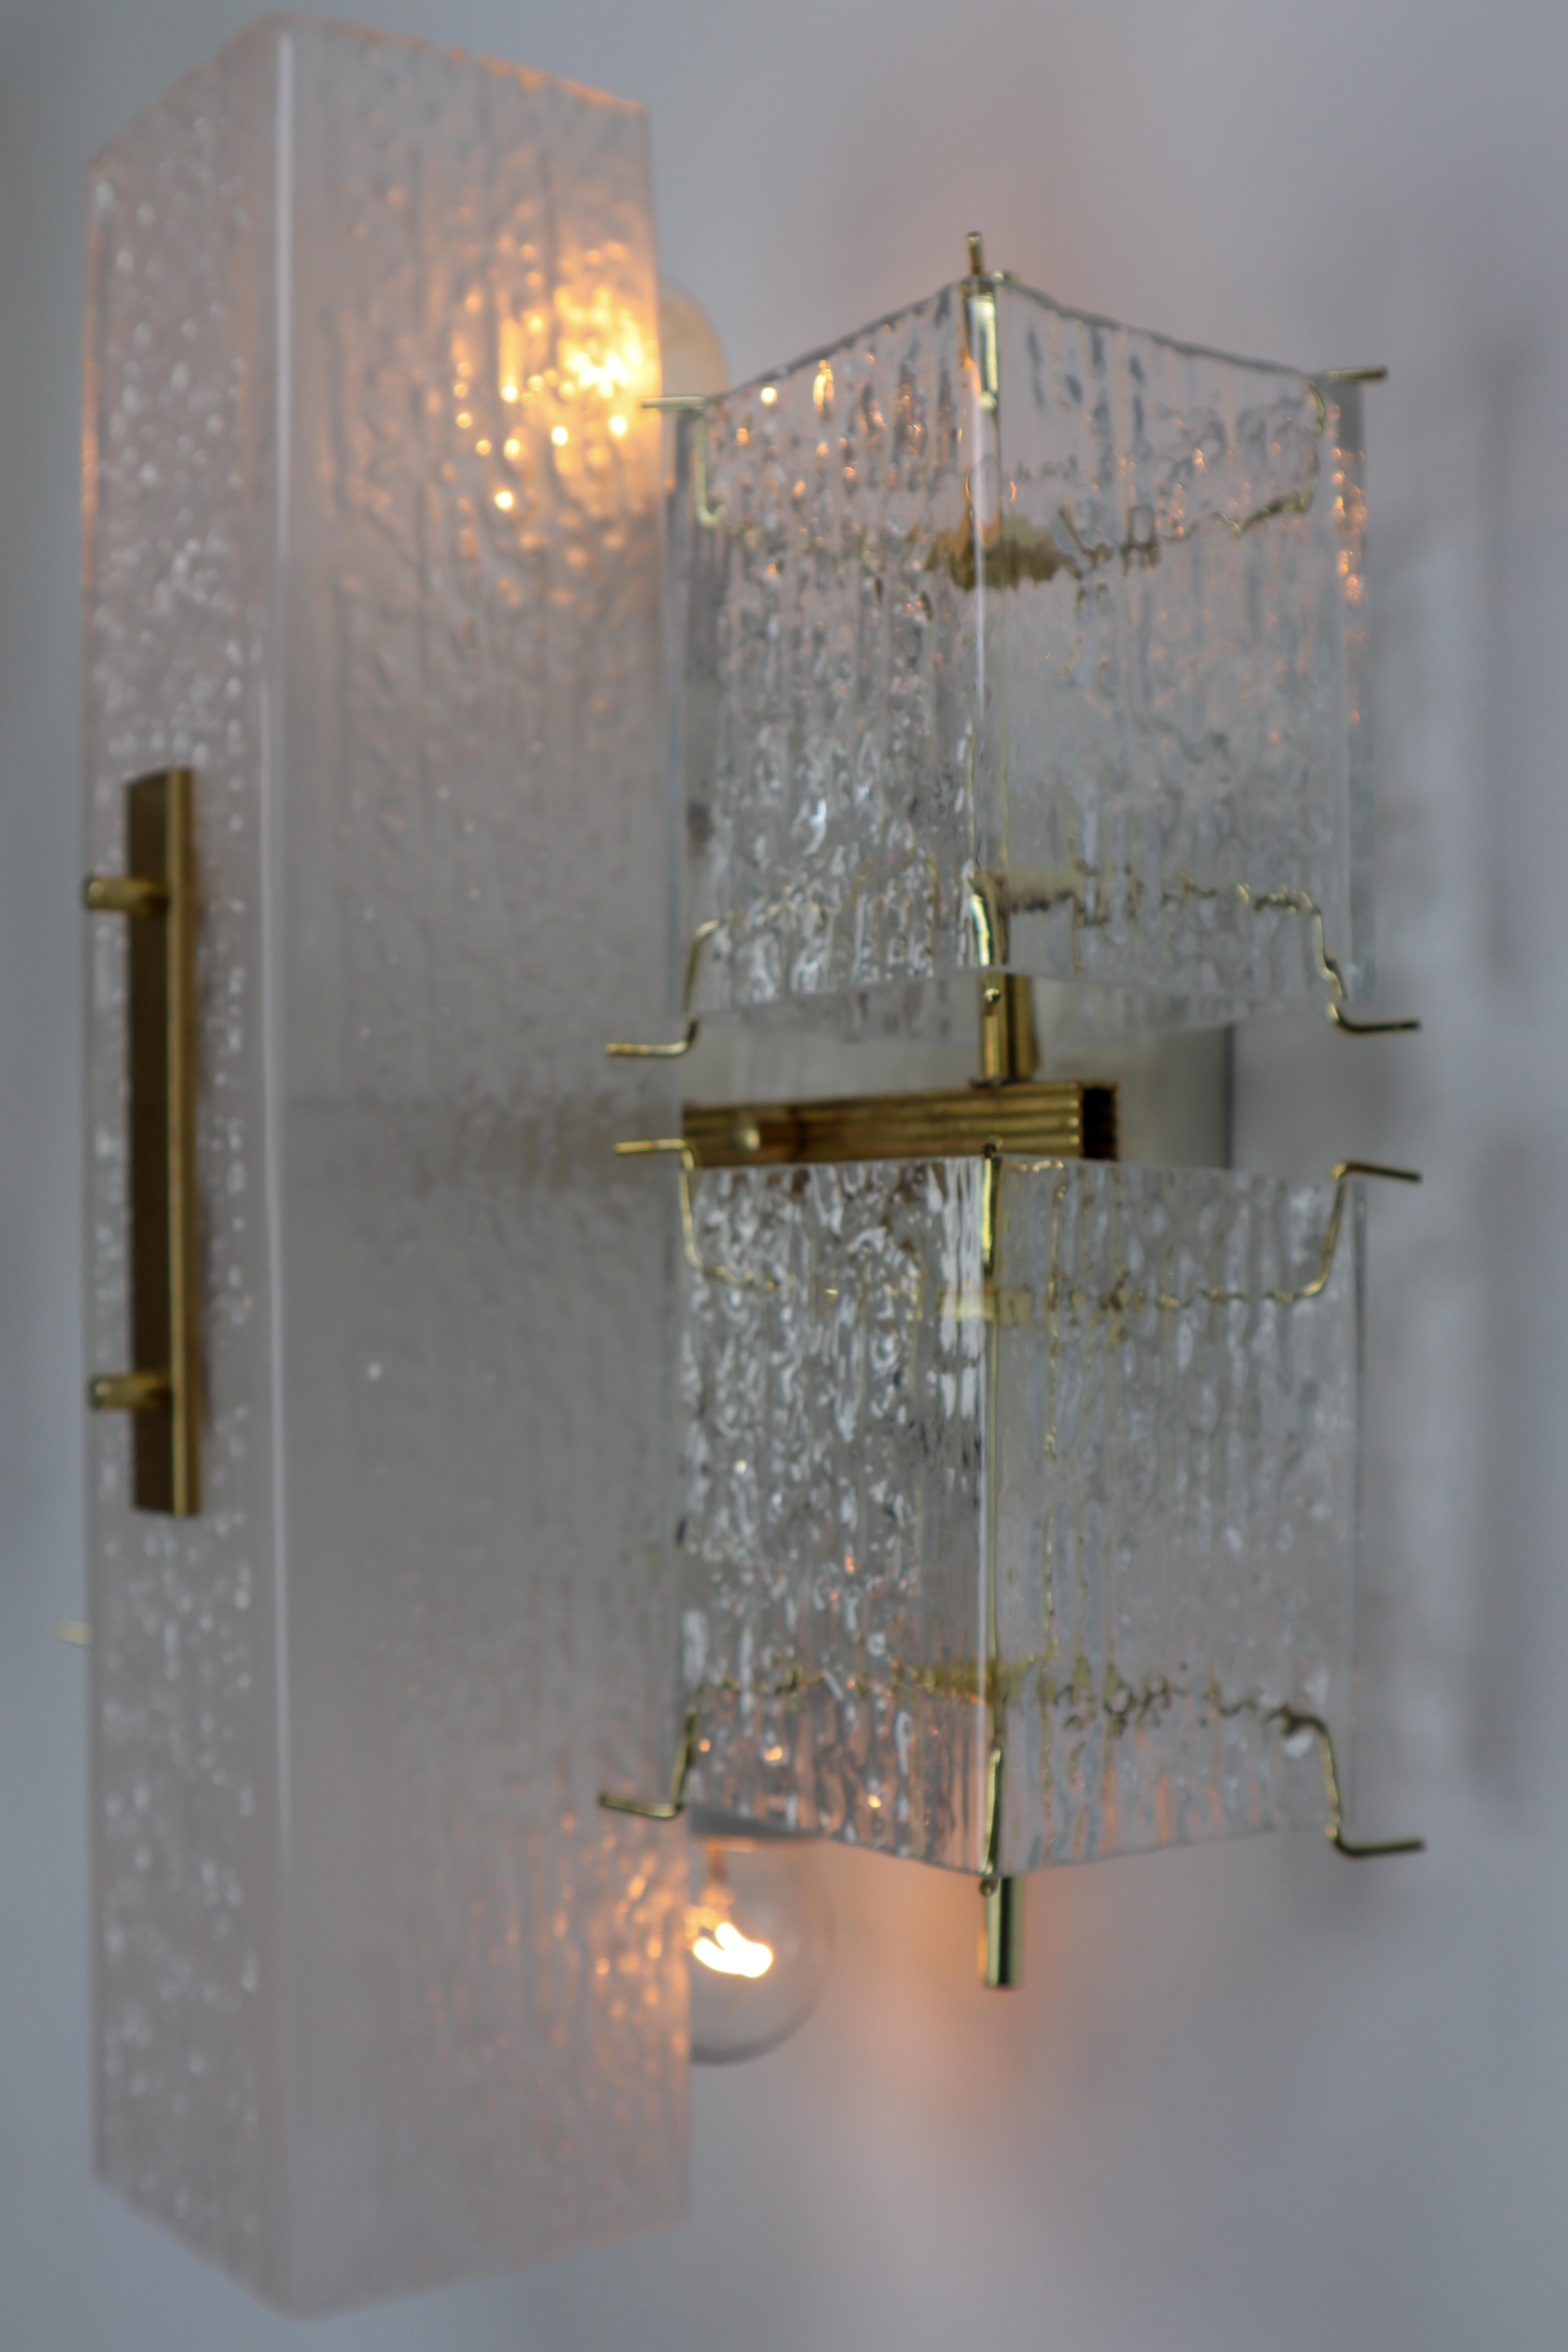 1 of 8 Midcentury Wall Lights with Structured Glass and Brass, Europe, 1970s For Sale 6